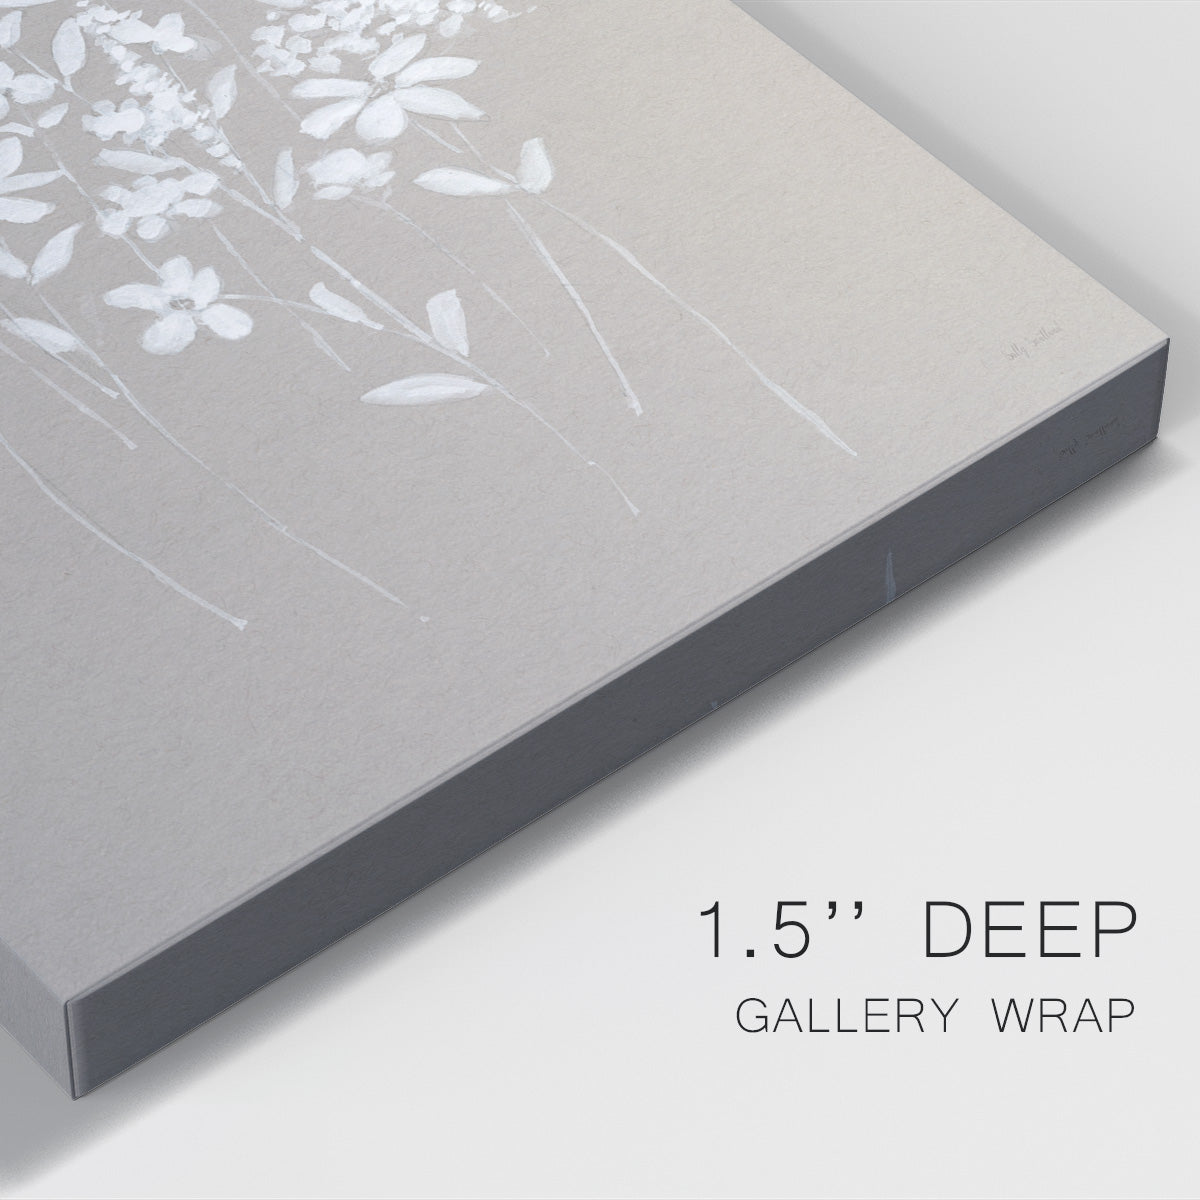 Delicate Botanicals I Premium Gallery Wrapped Canvas - Ready to Hang